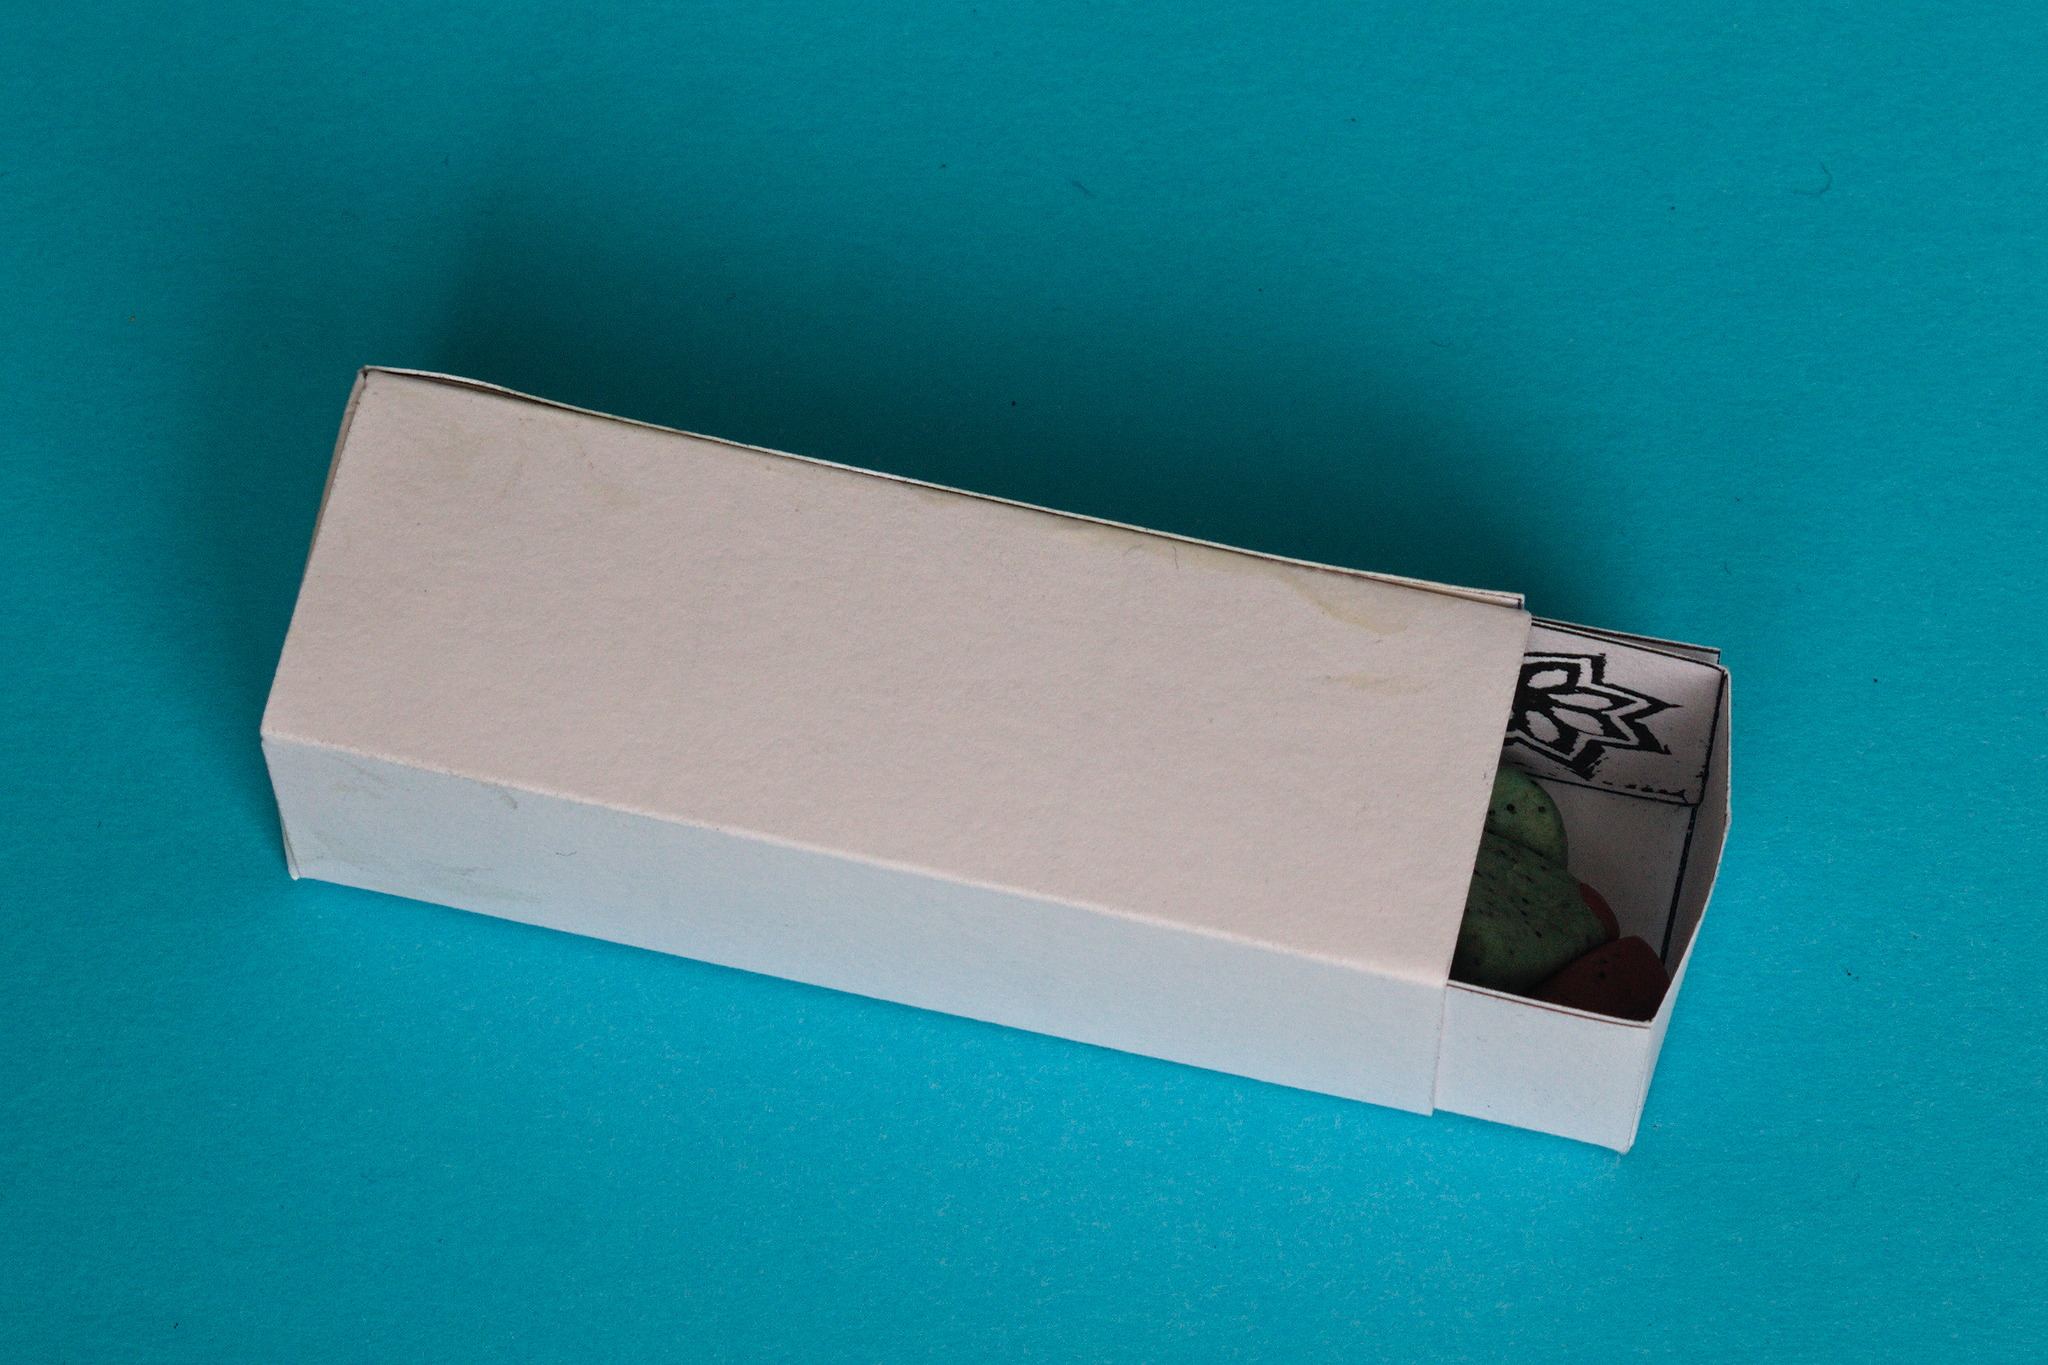 A white box, about 2.5 cm × 2.5 cm × 7.5 cm; a drawer is
sliding out of one small end.